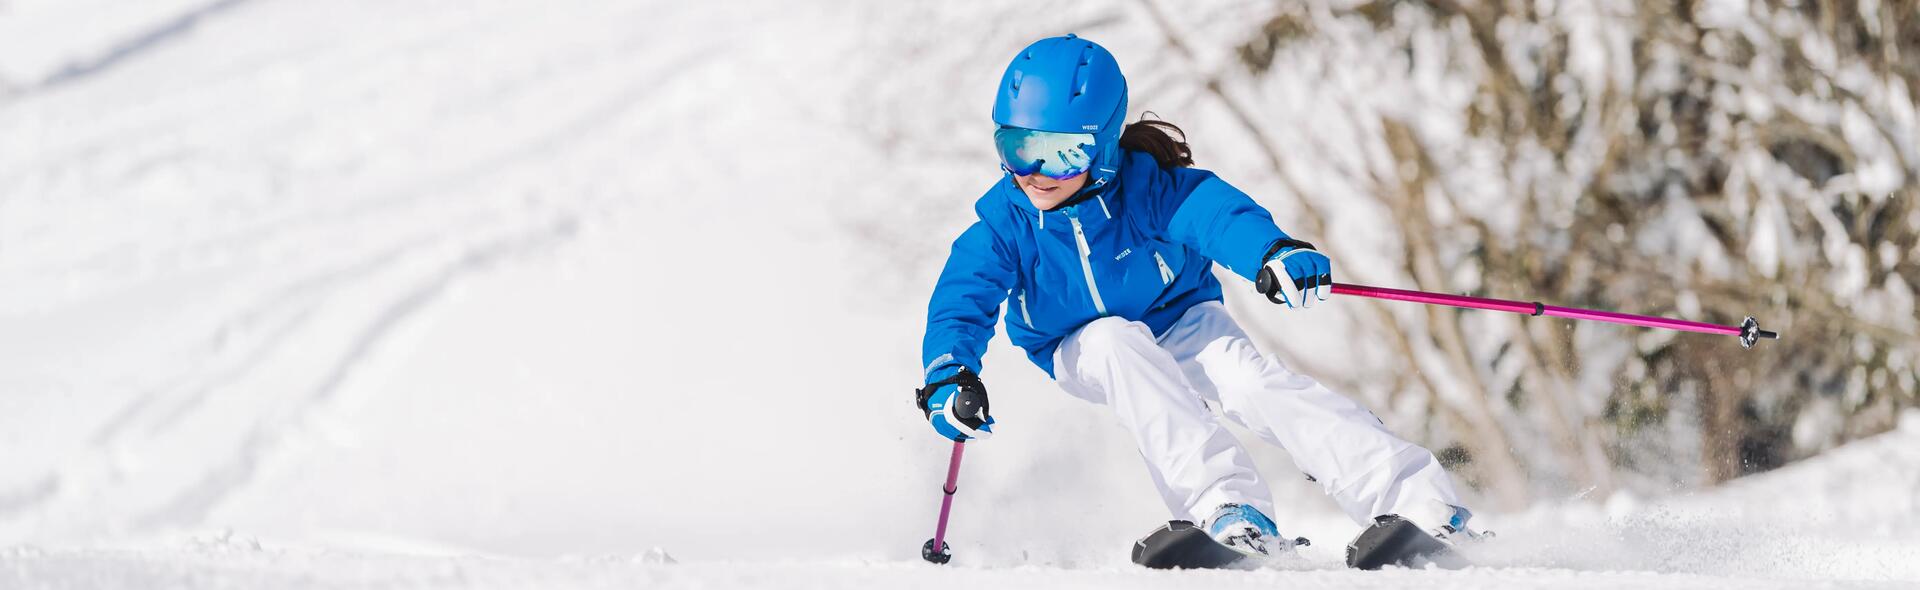 how to choose kid's skis